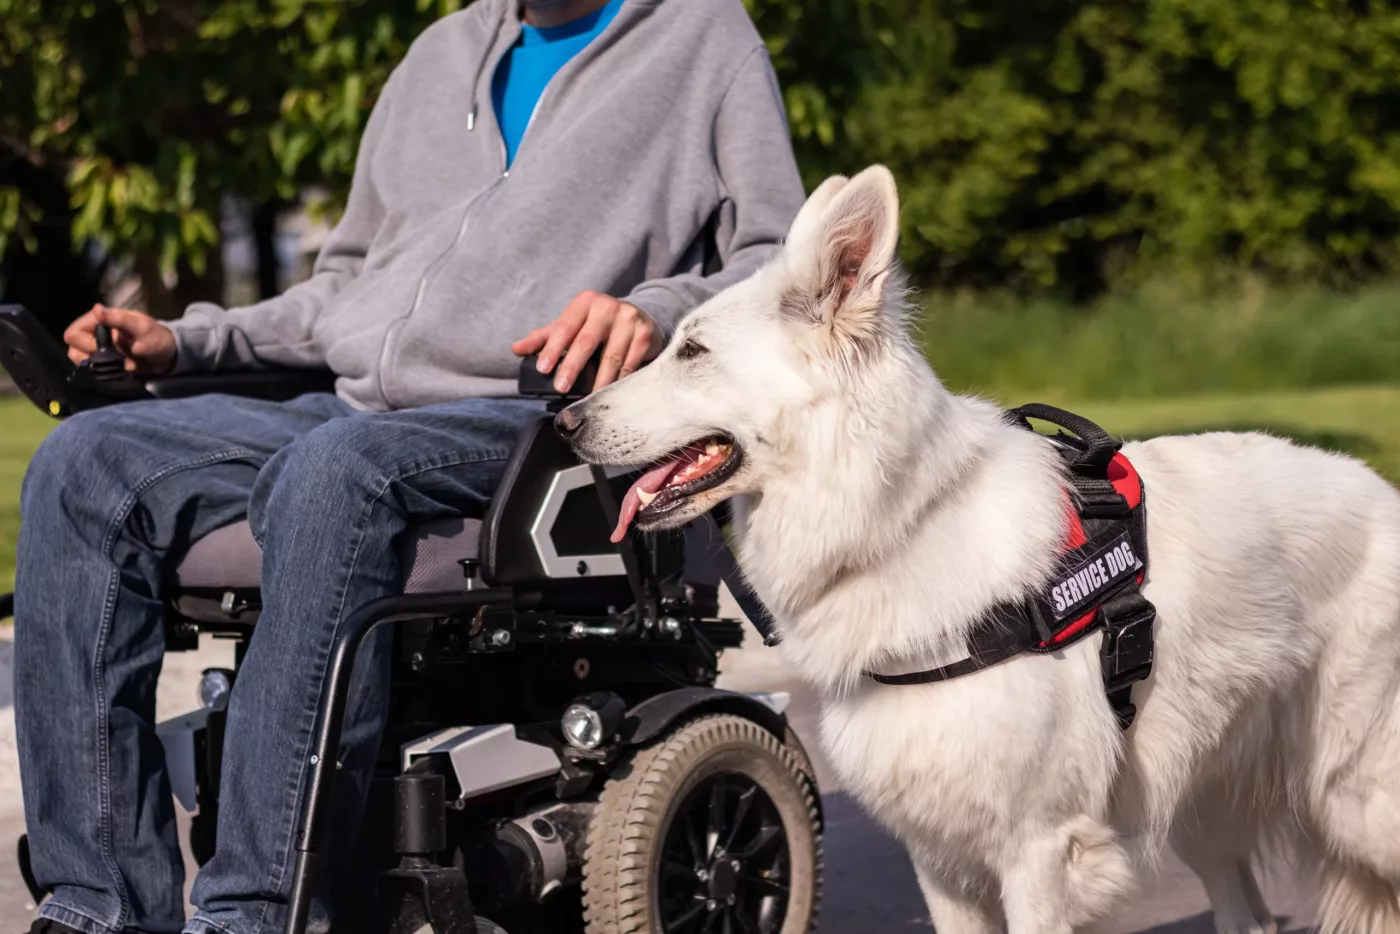 vests, leashes and more for your service dog.